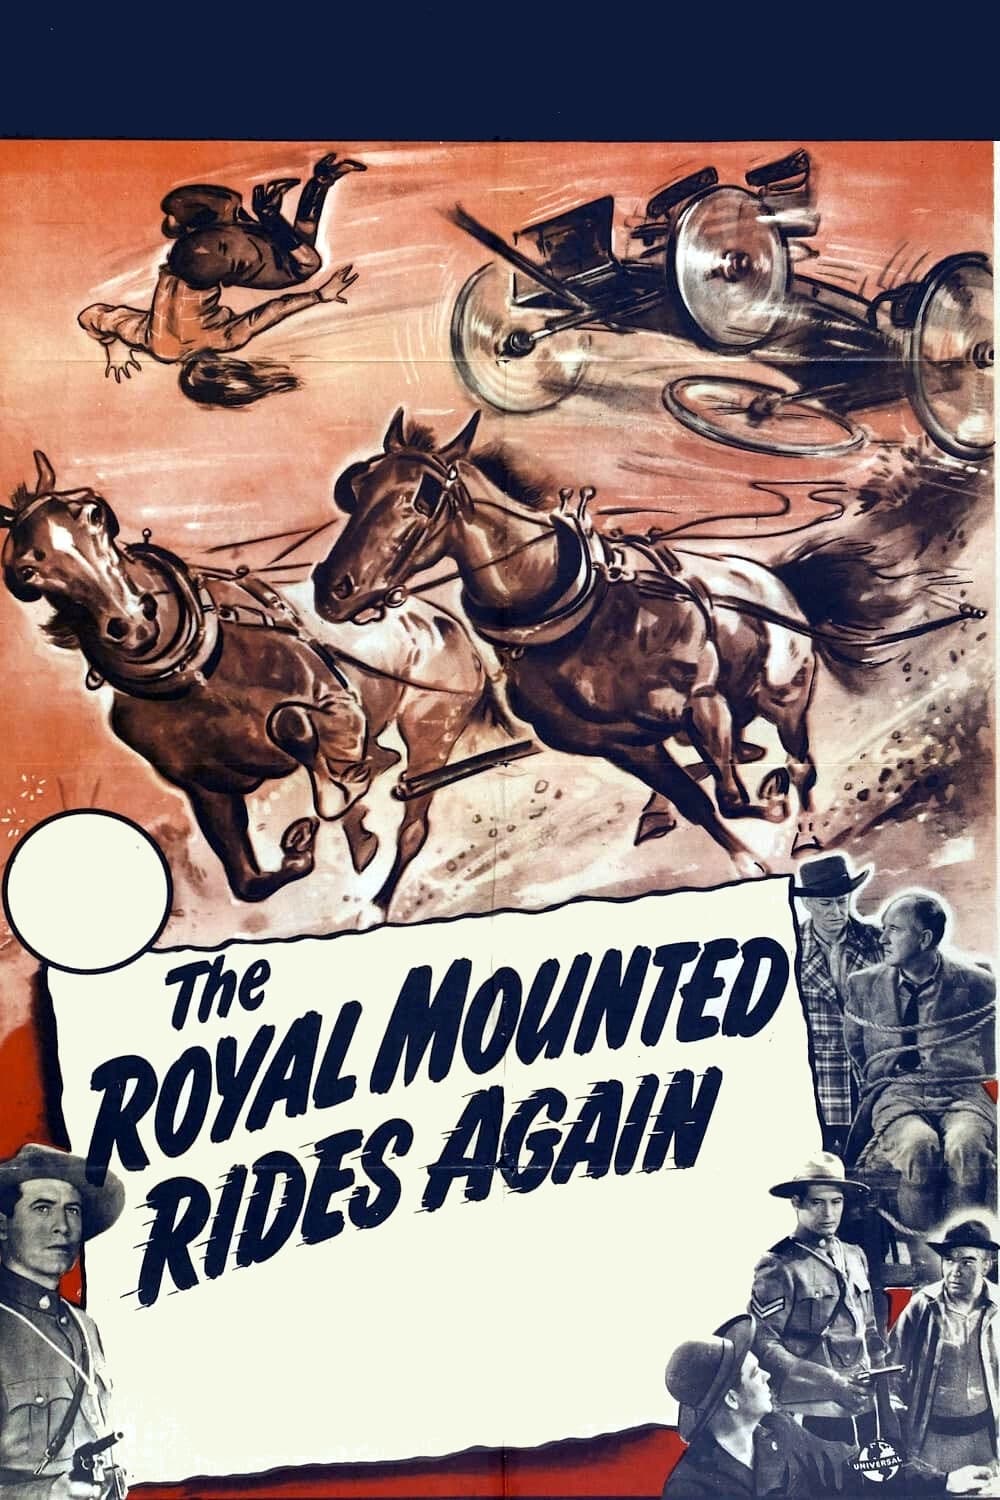 The Royal Mounted Rides Again (1945)